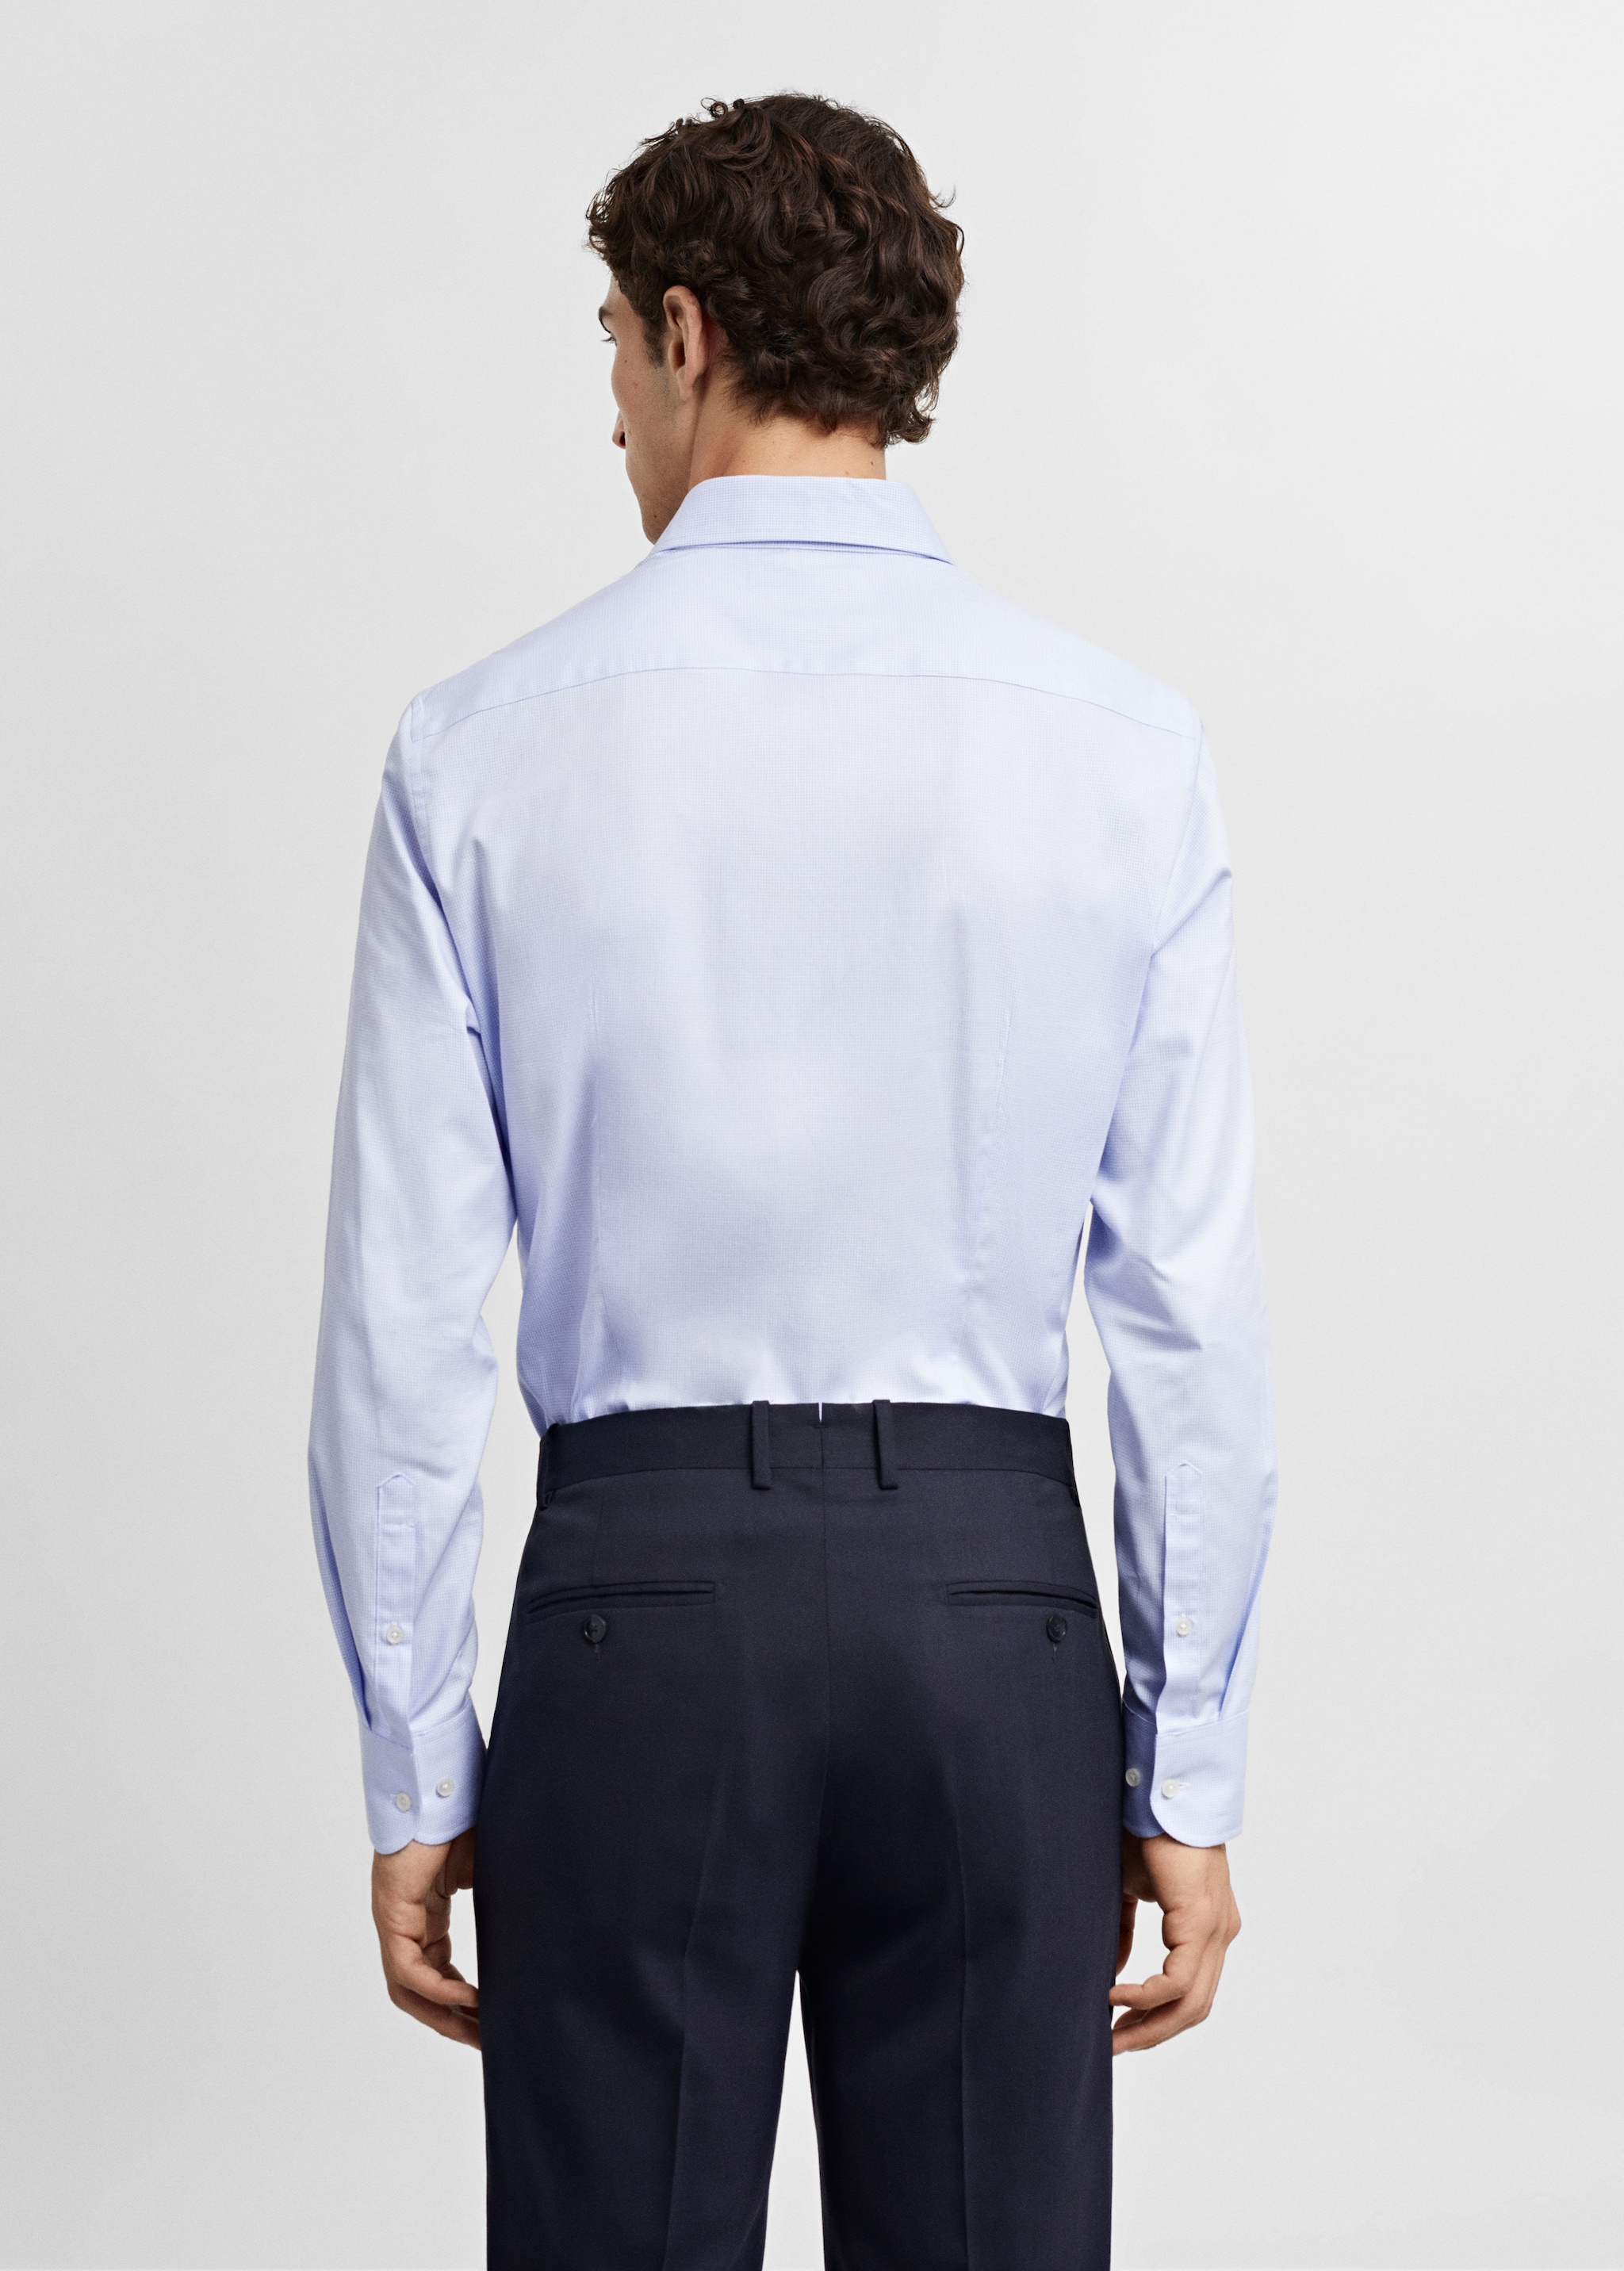 Slim fit structured suit shirt - Reverse of the article